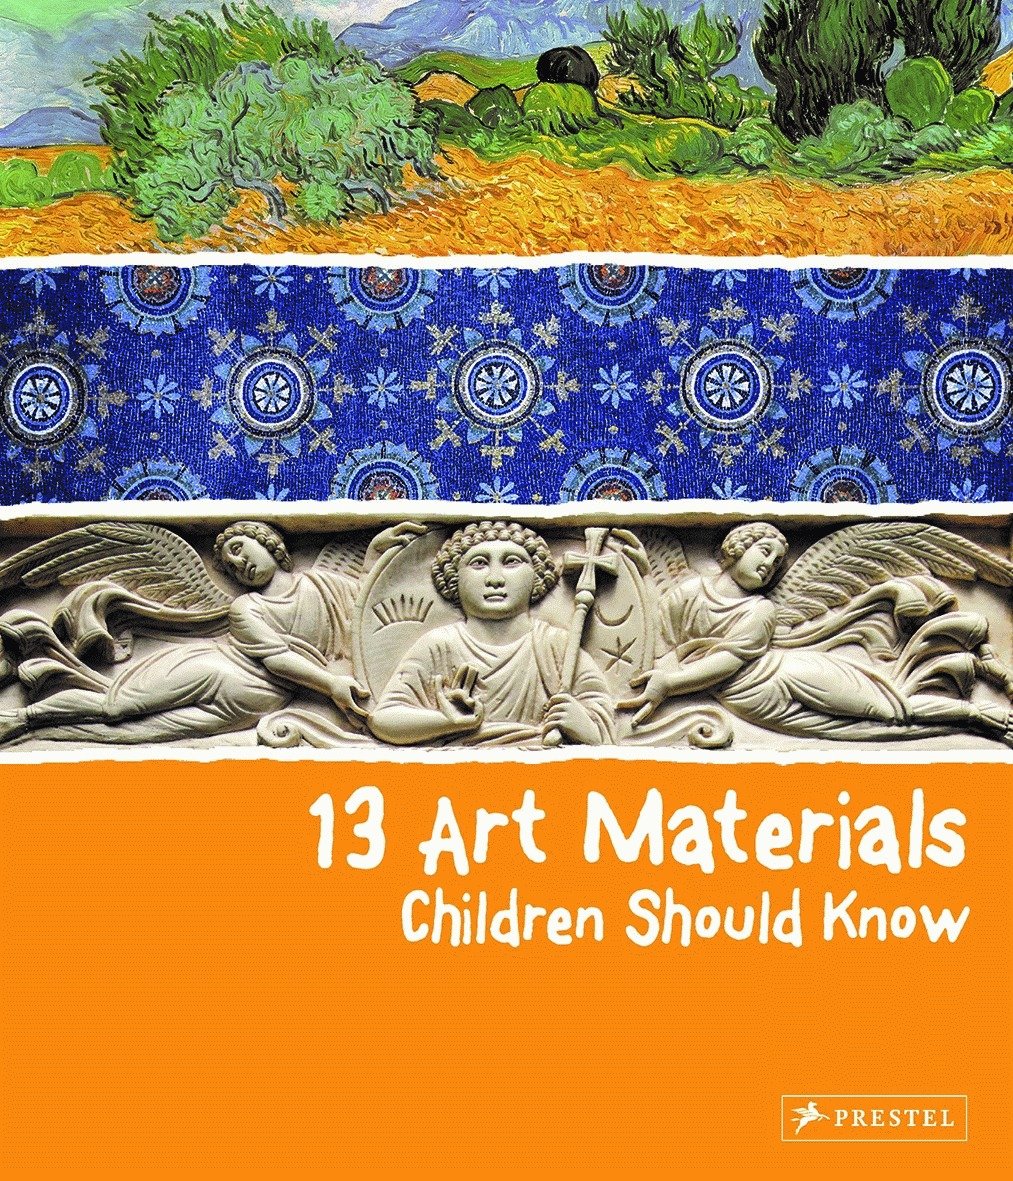 13 Art Materials Children Should Know (Hardcover Book)